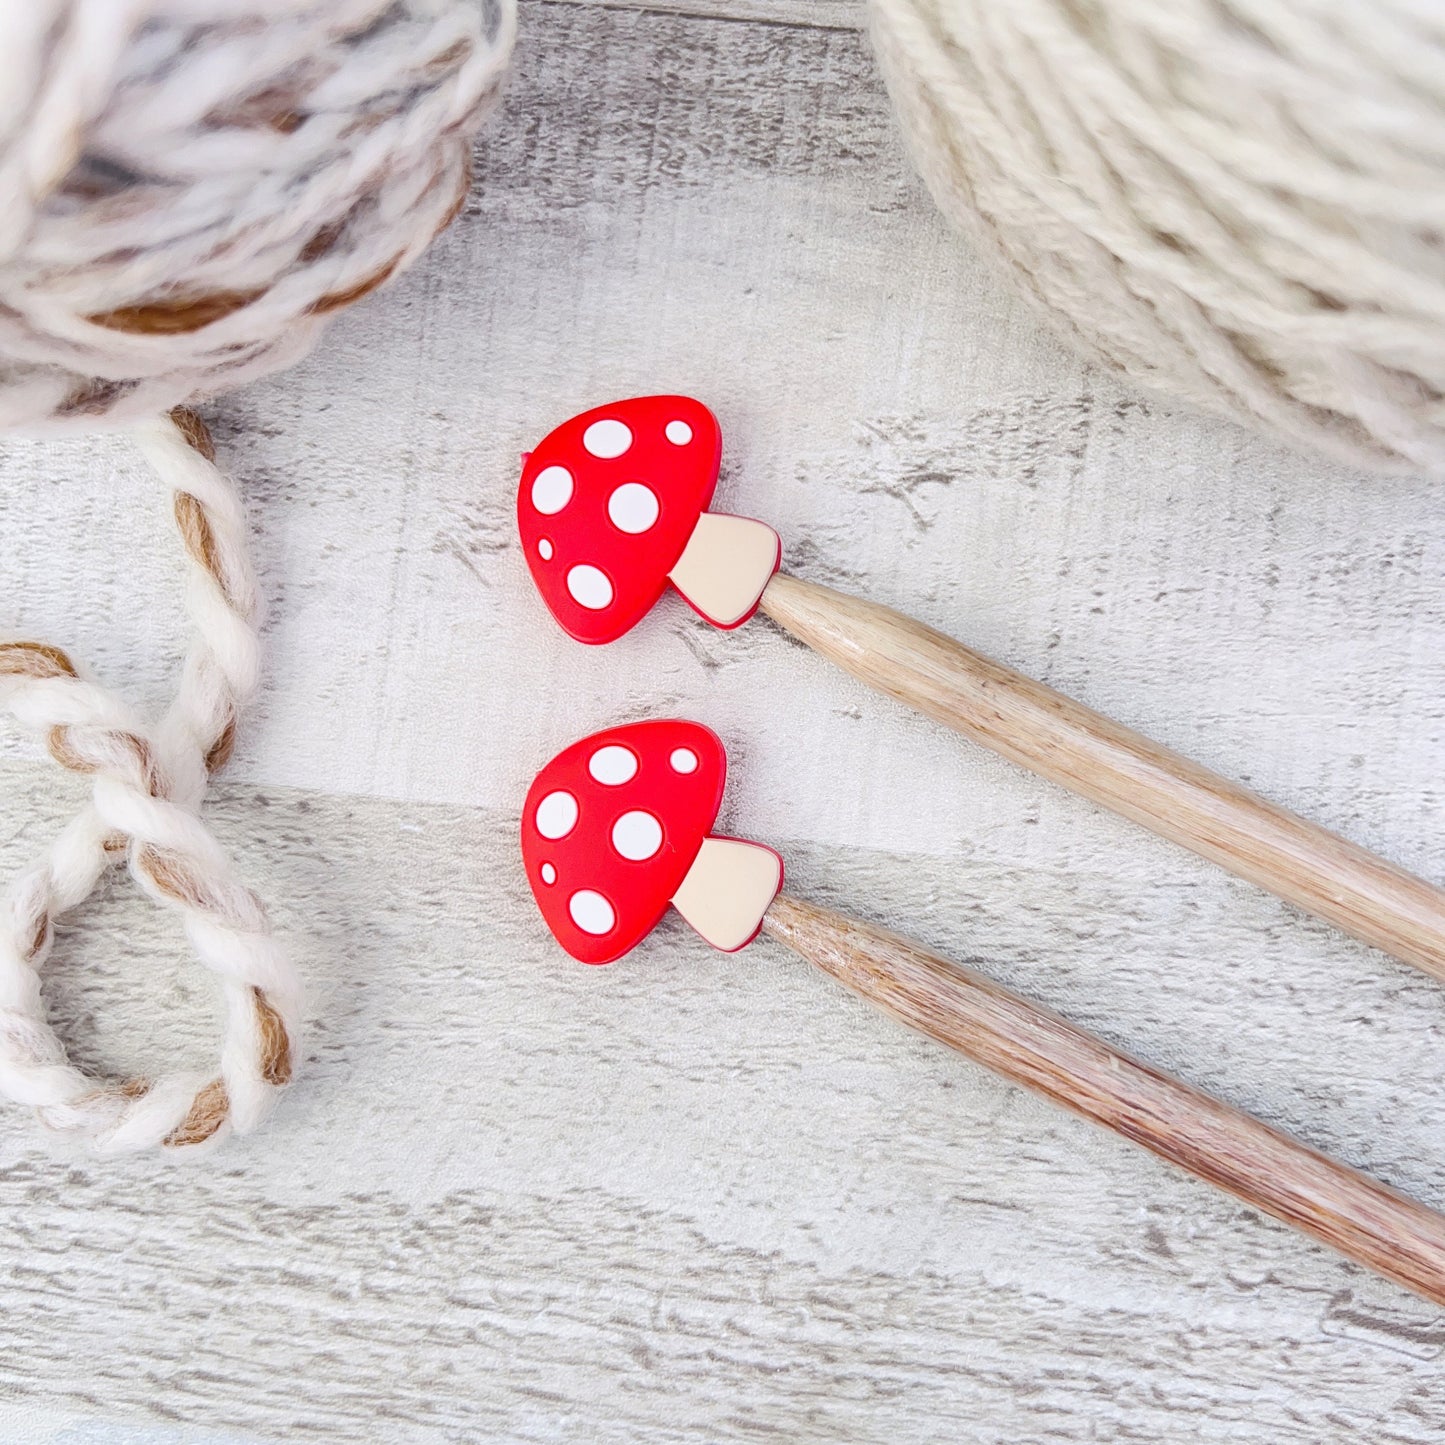 Mushroom Stitch Stoppers Knitting Needle Point Protectors